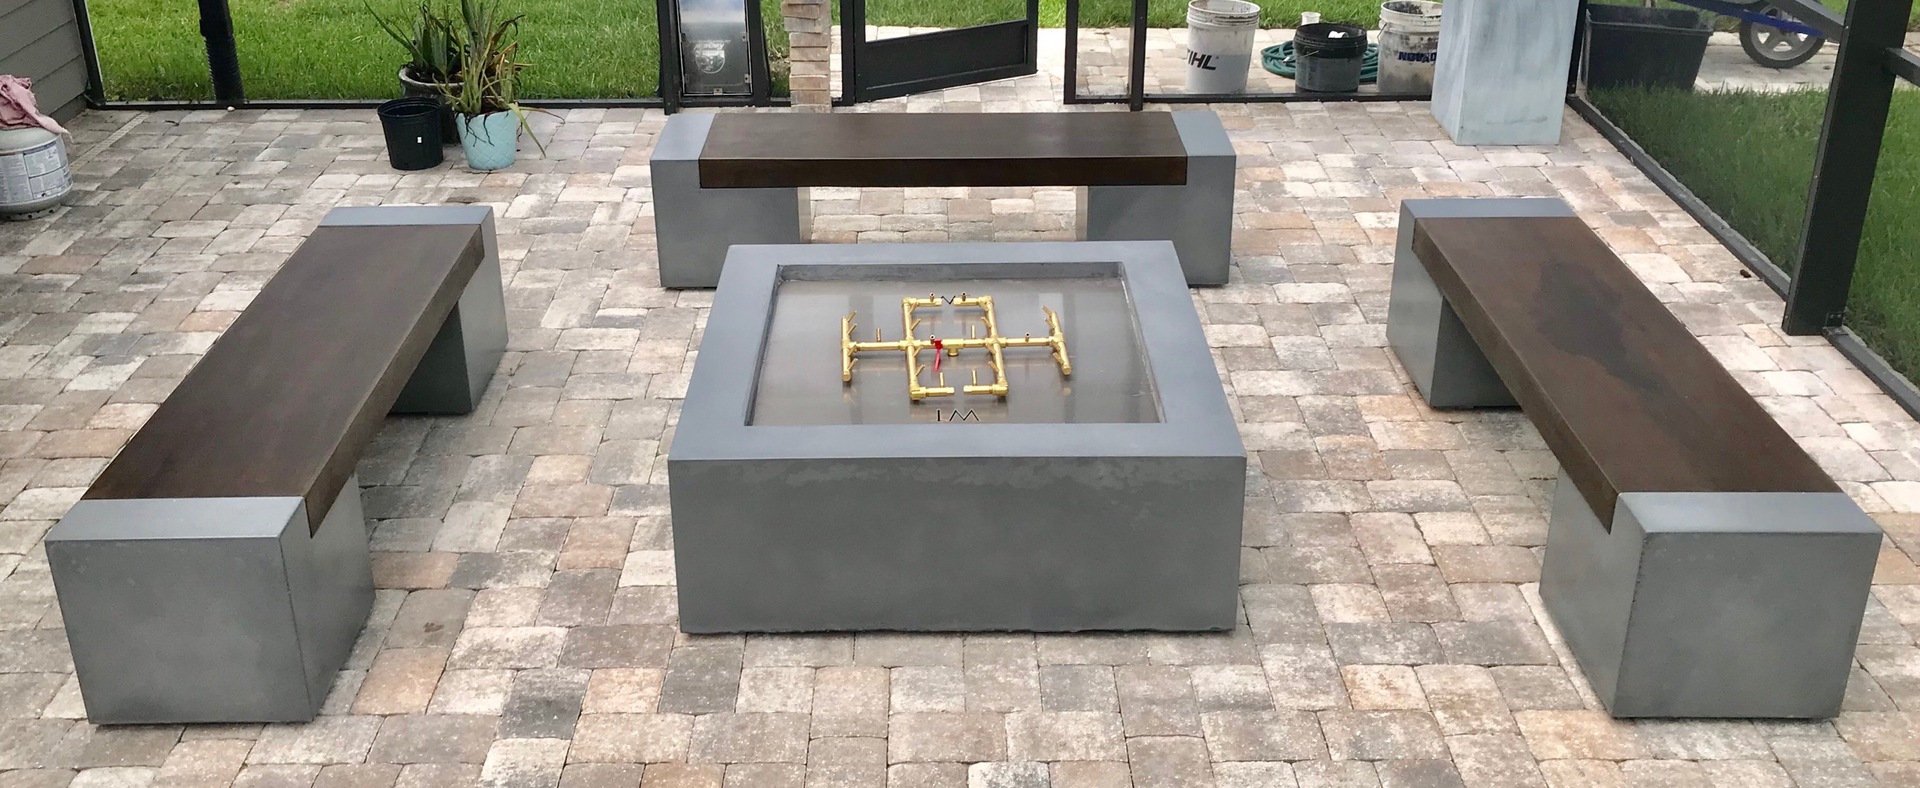 48" Cube, WT Burner and Concrete Seating